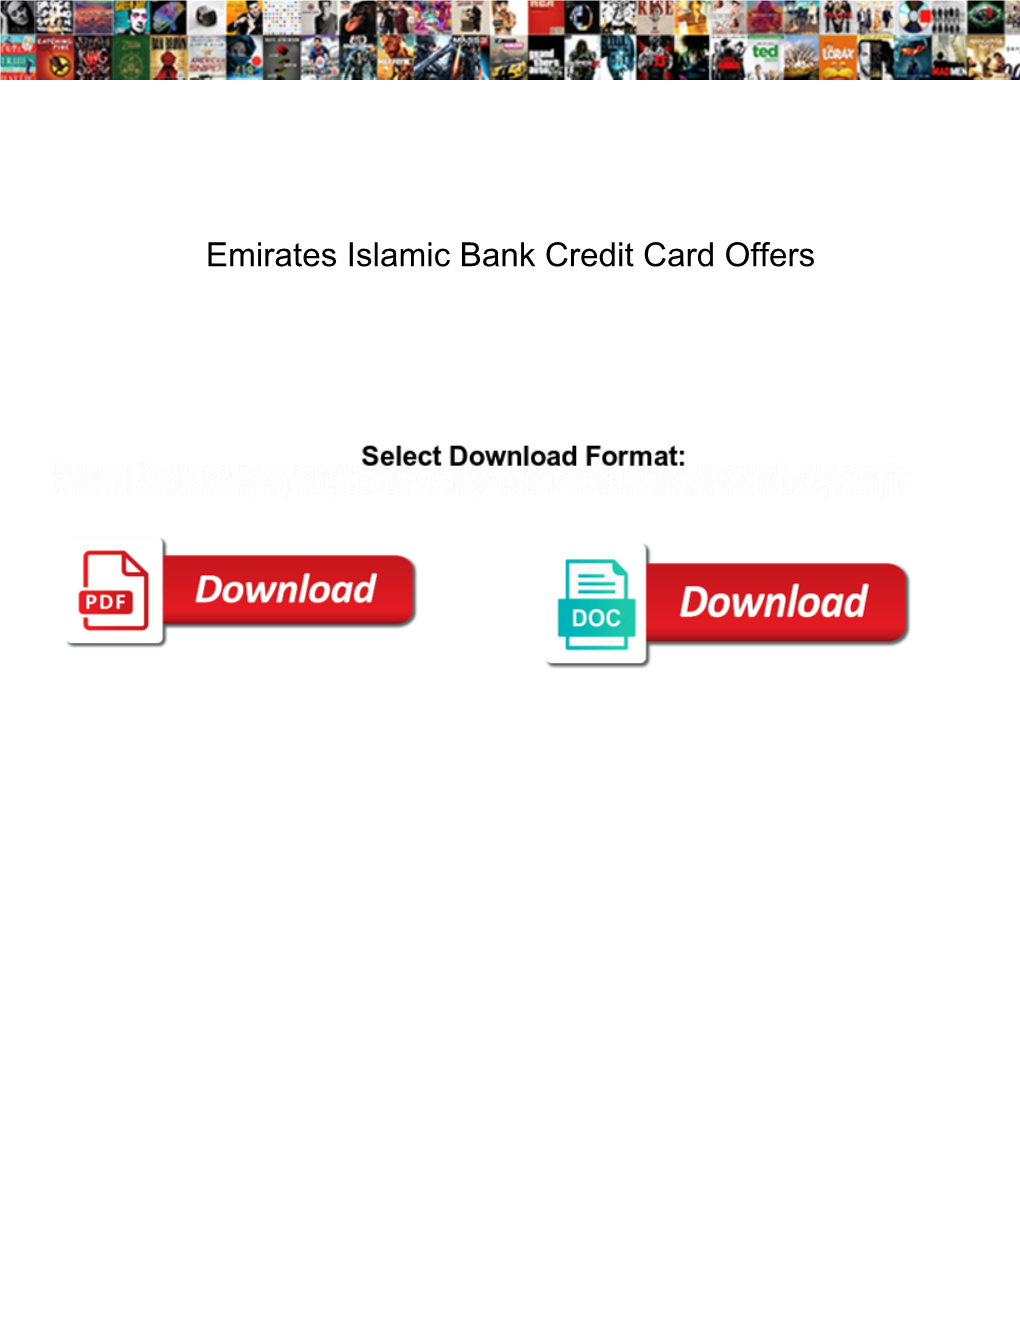 Emirates Islamic Bank Credit Card Offers